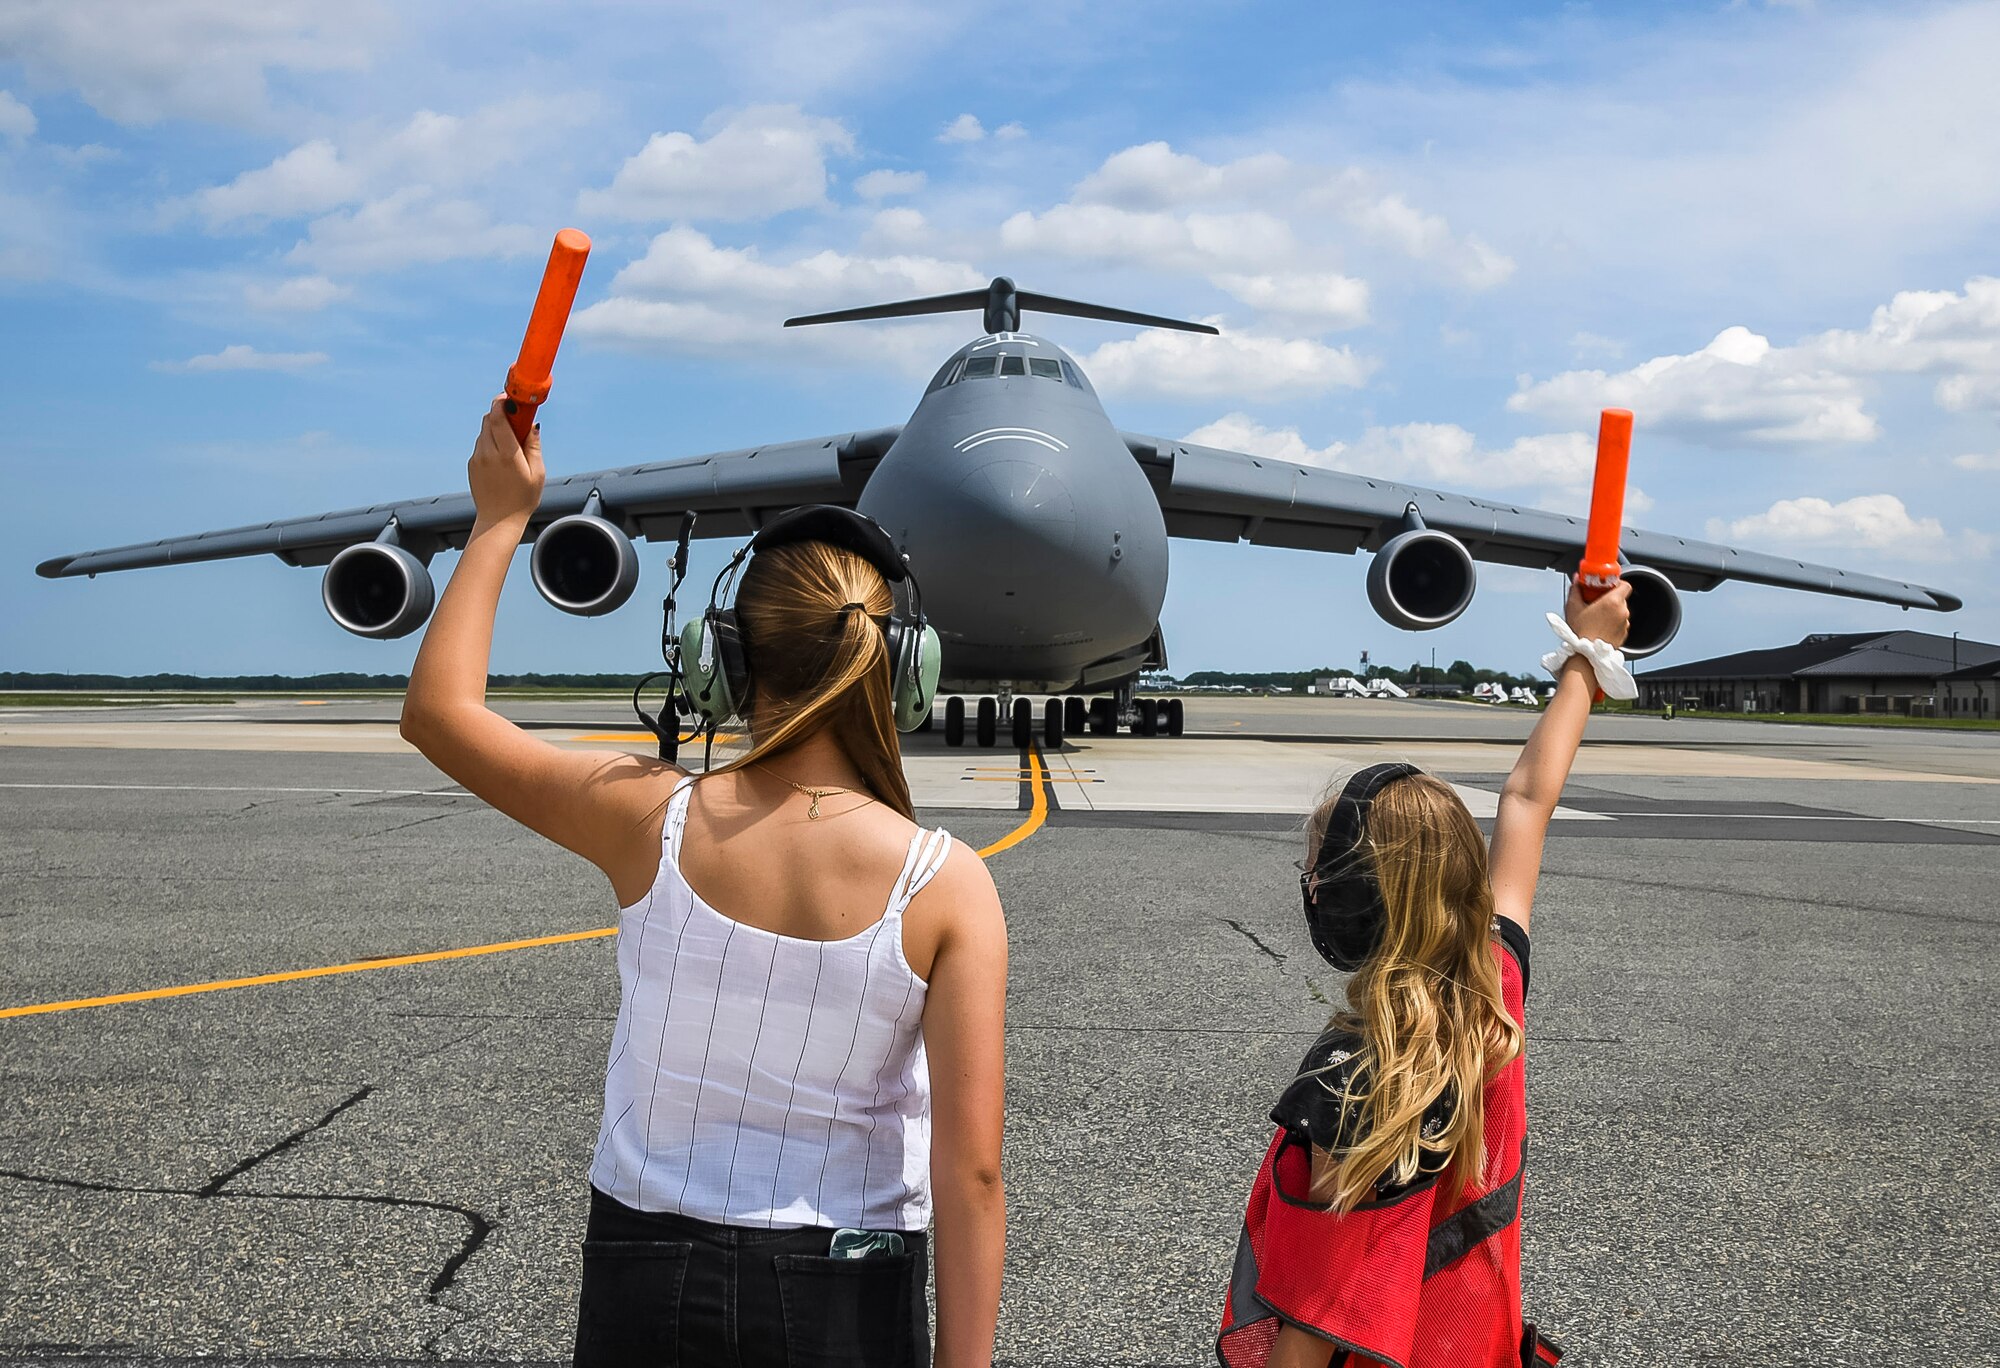 Devyn Jones, left, and Brooke Jones, marshal in a C-5M Super Galaxy piloted by their father, Col. Matthew Jones, 436th Airlift Wing commander, after his fini flight at Dover Air Force Base, Delaware, May 4, 2021. A “fini flight” is an Air Force tradition where an Airman and their family celebrate their final flight. (U.S. Air Force photo by Airman 1st Class Stephani Barge)